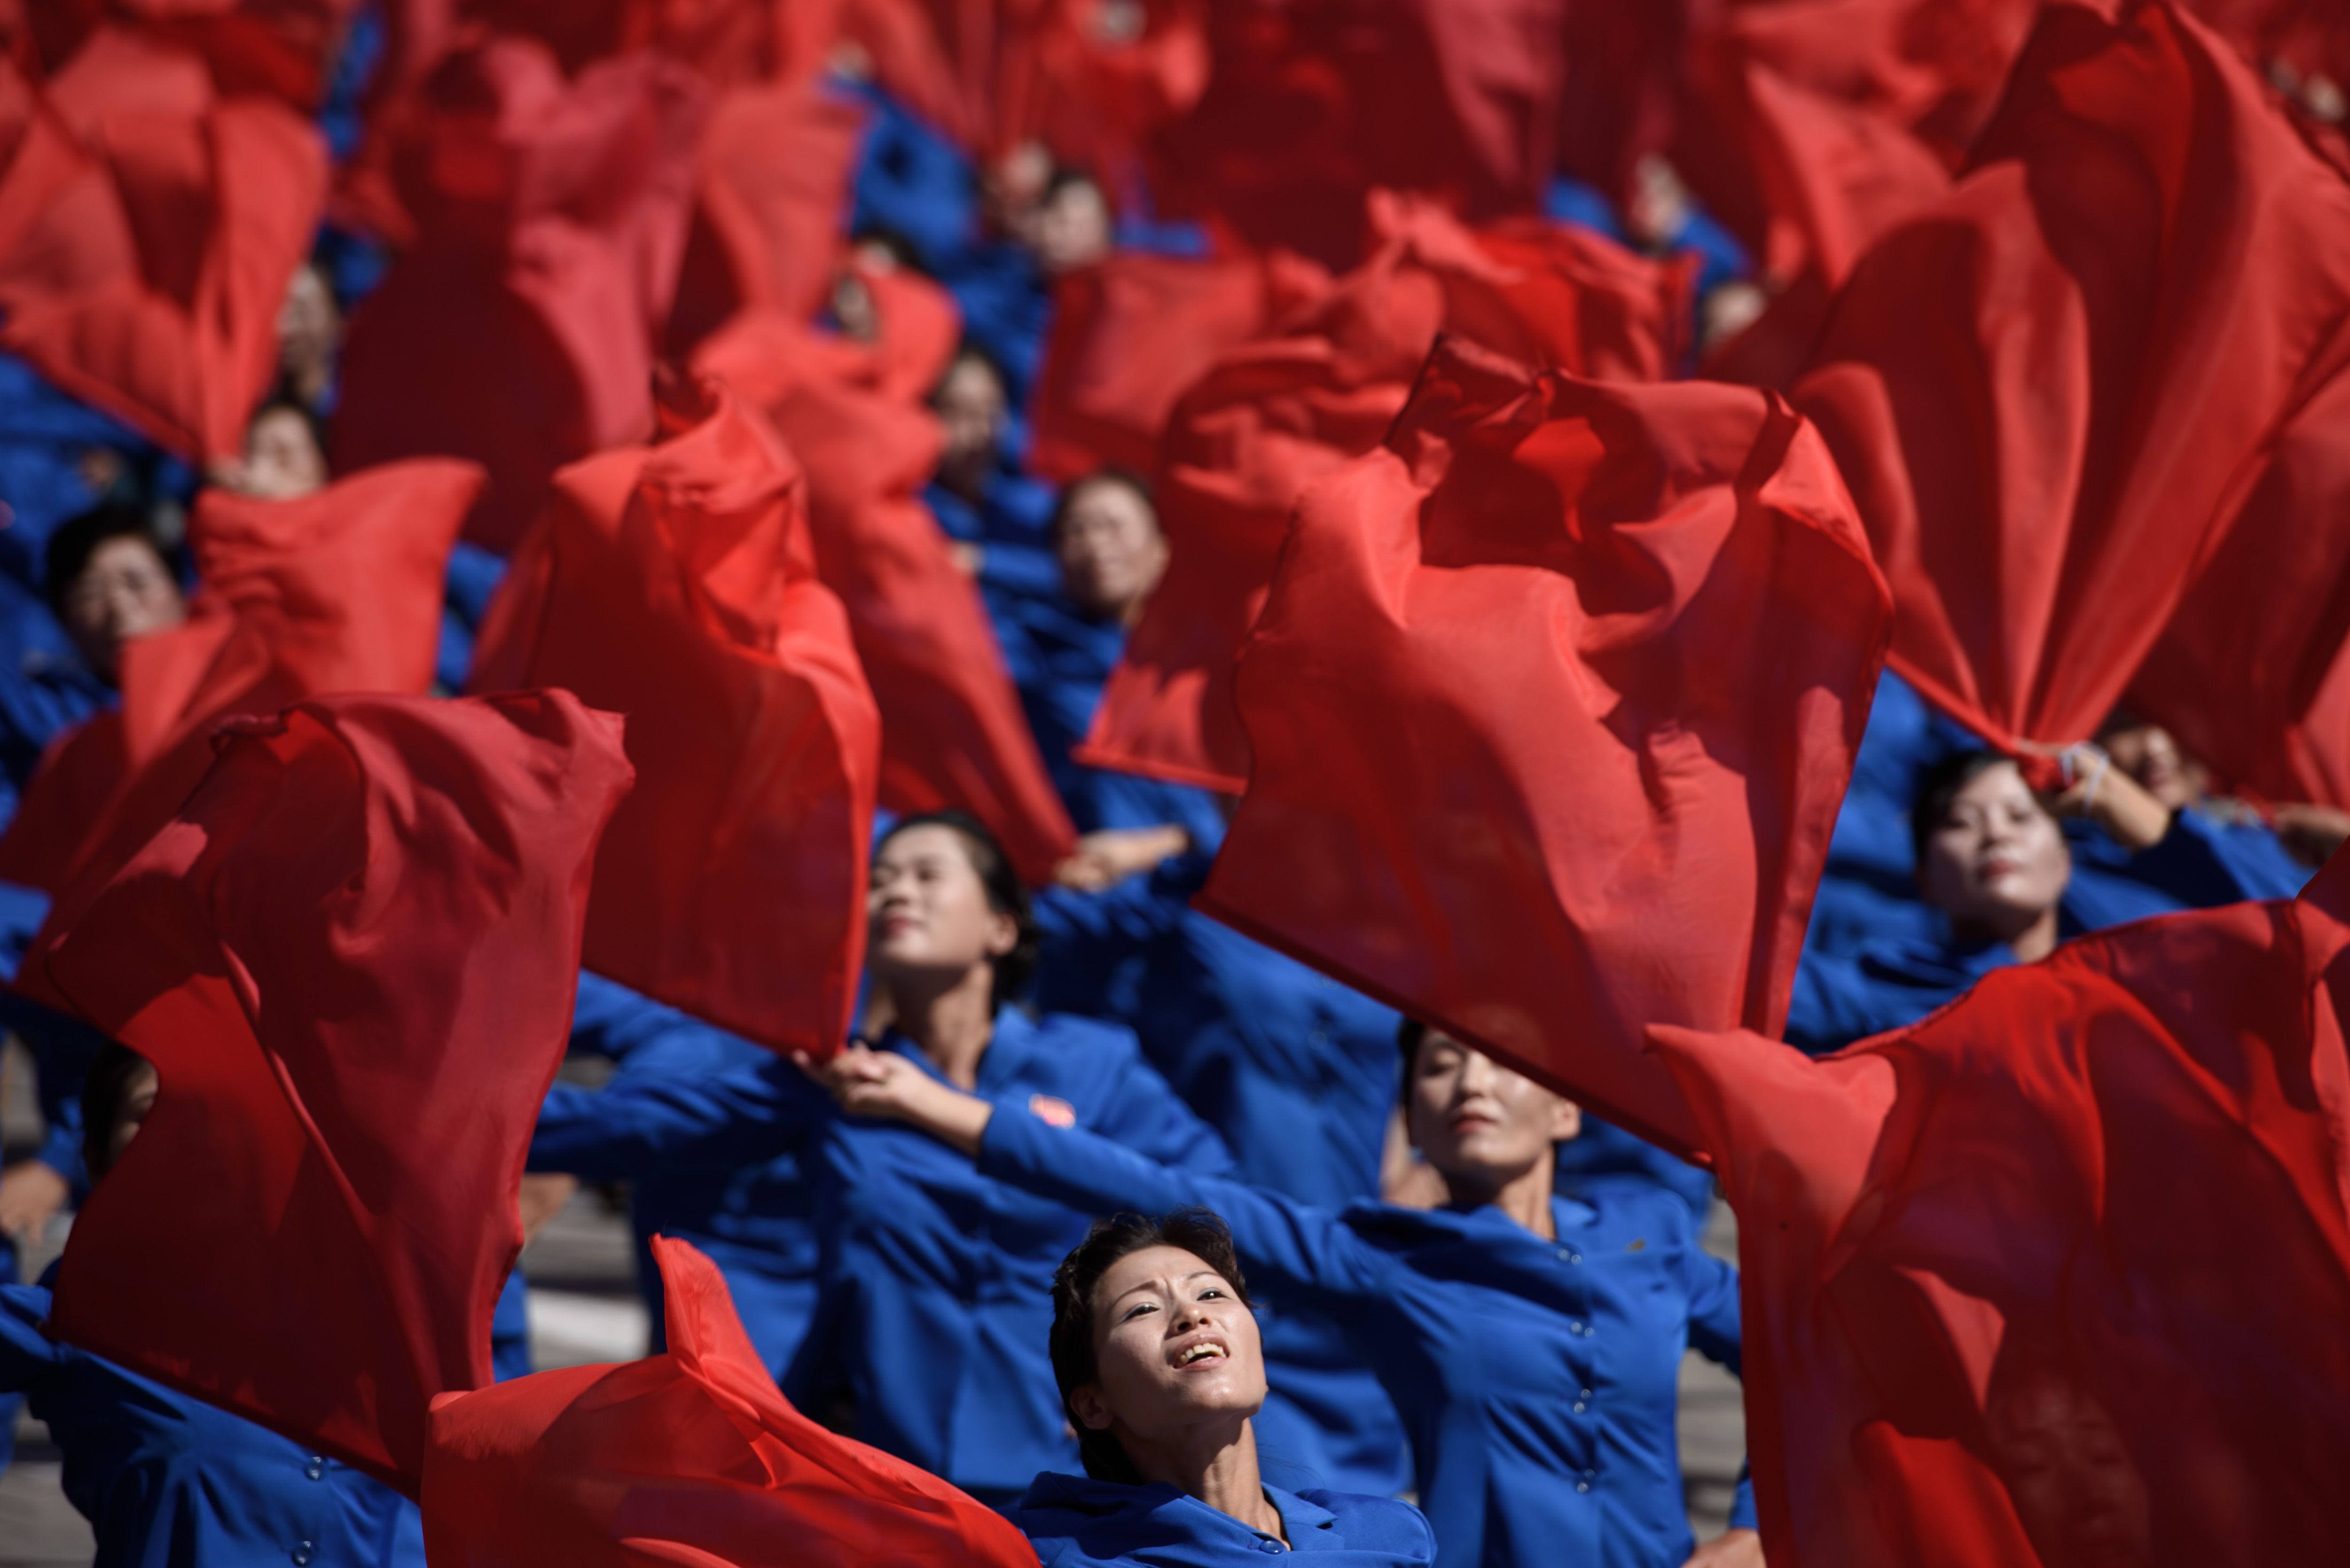 Participants wave flags as they march past a balcony from where North Korea's leader Kim Jong Un was watching, during a mass rally on Kim Il Sung square in Pyongyang on Sept. 9, 2018.  North Korea held a military parade to mark its 70th birthday, but